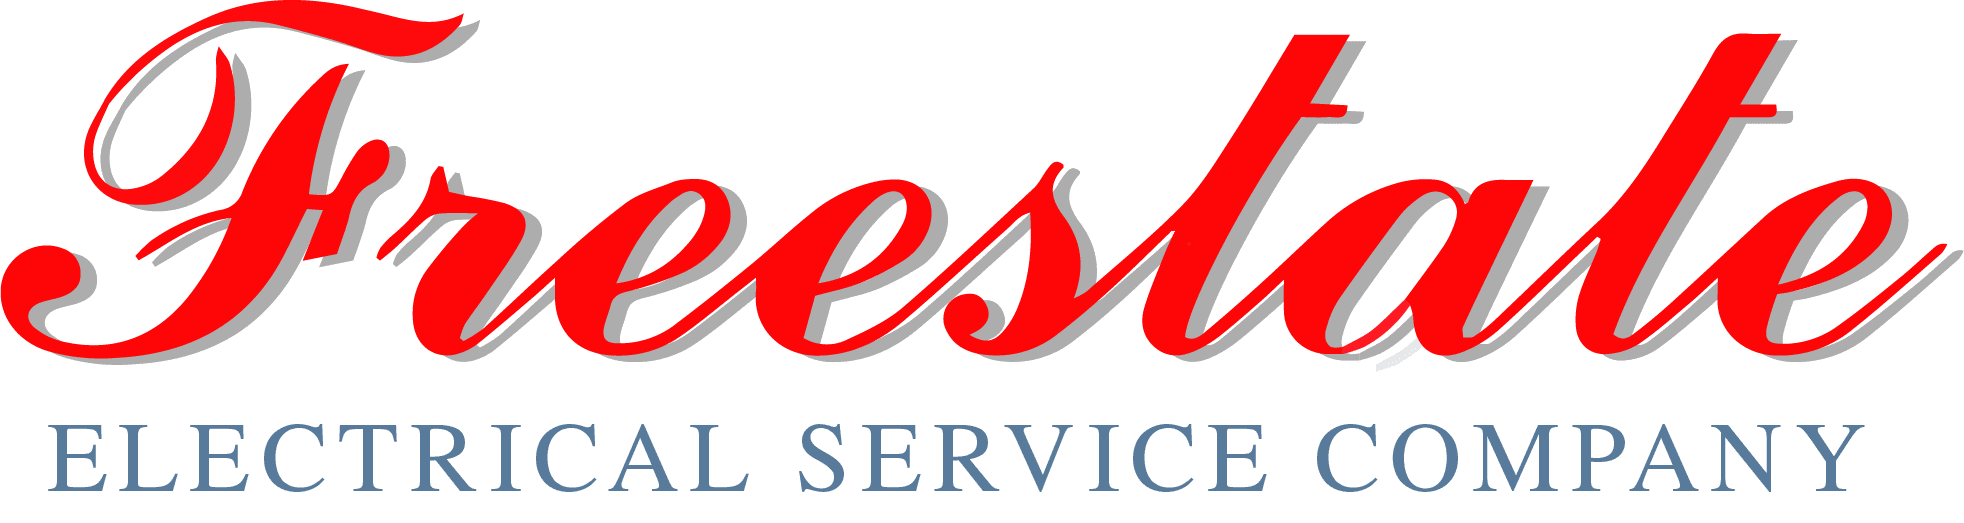 Freestate-Electrical-Service-Company-vector-file-2021.09.03-2-300×80-1